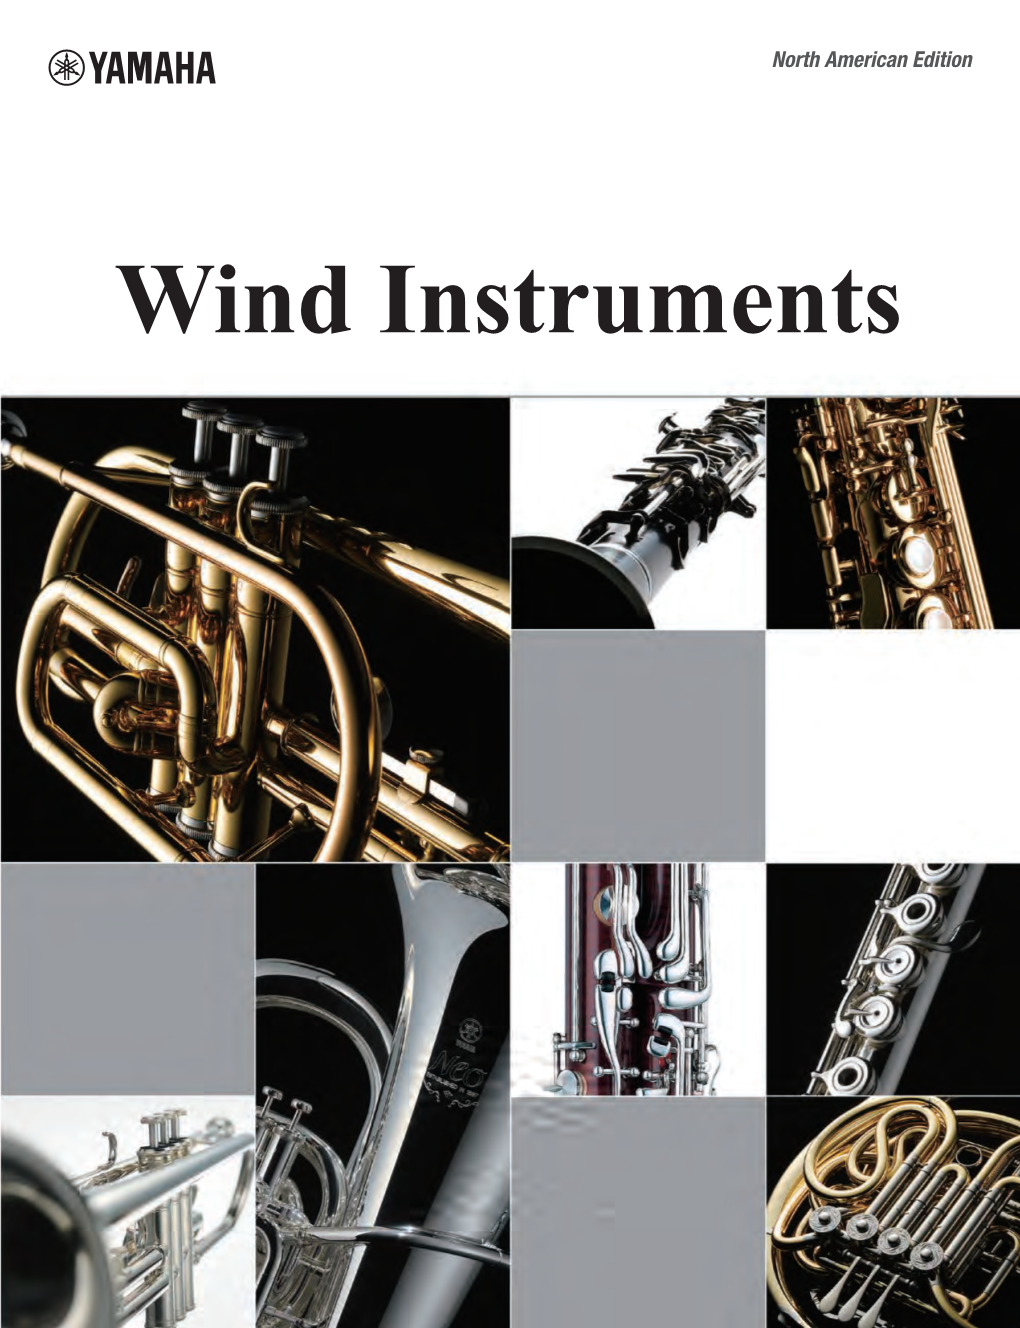 Wind Instruments from the Hands of Our Artisans…